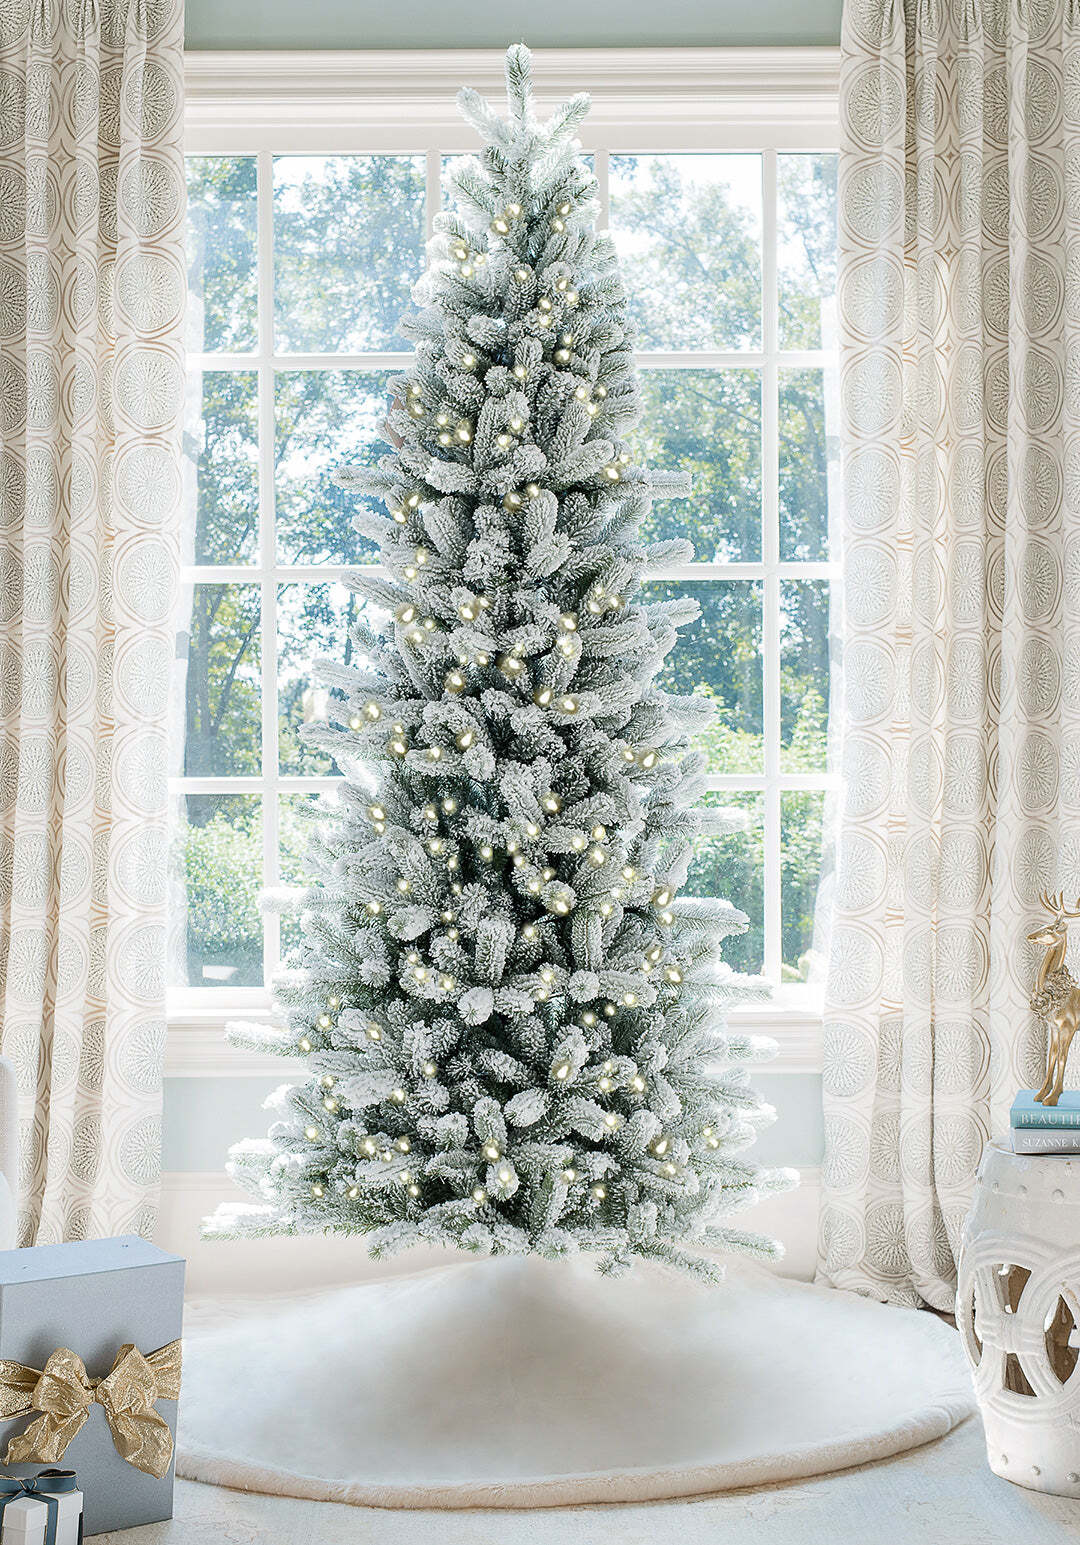 10' King Flock® Slim Artificial Christmas Tree with 1000 Warm White LED Lights